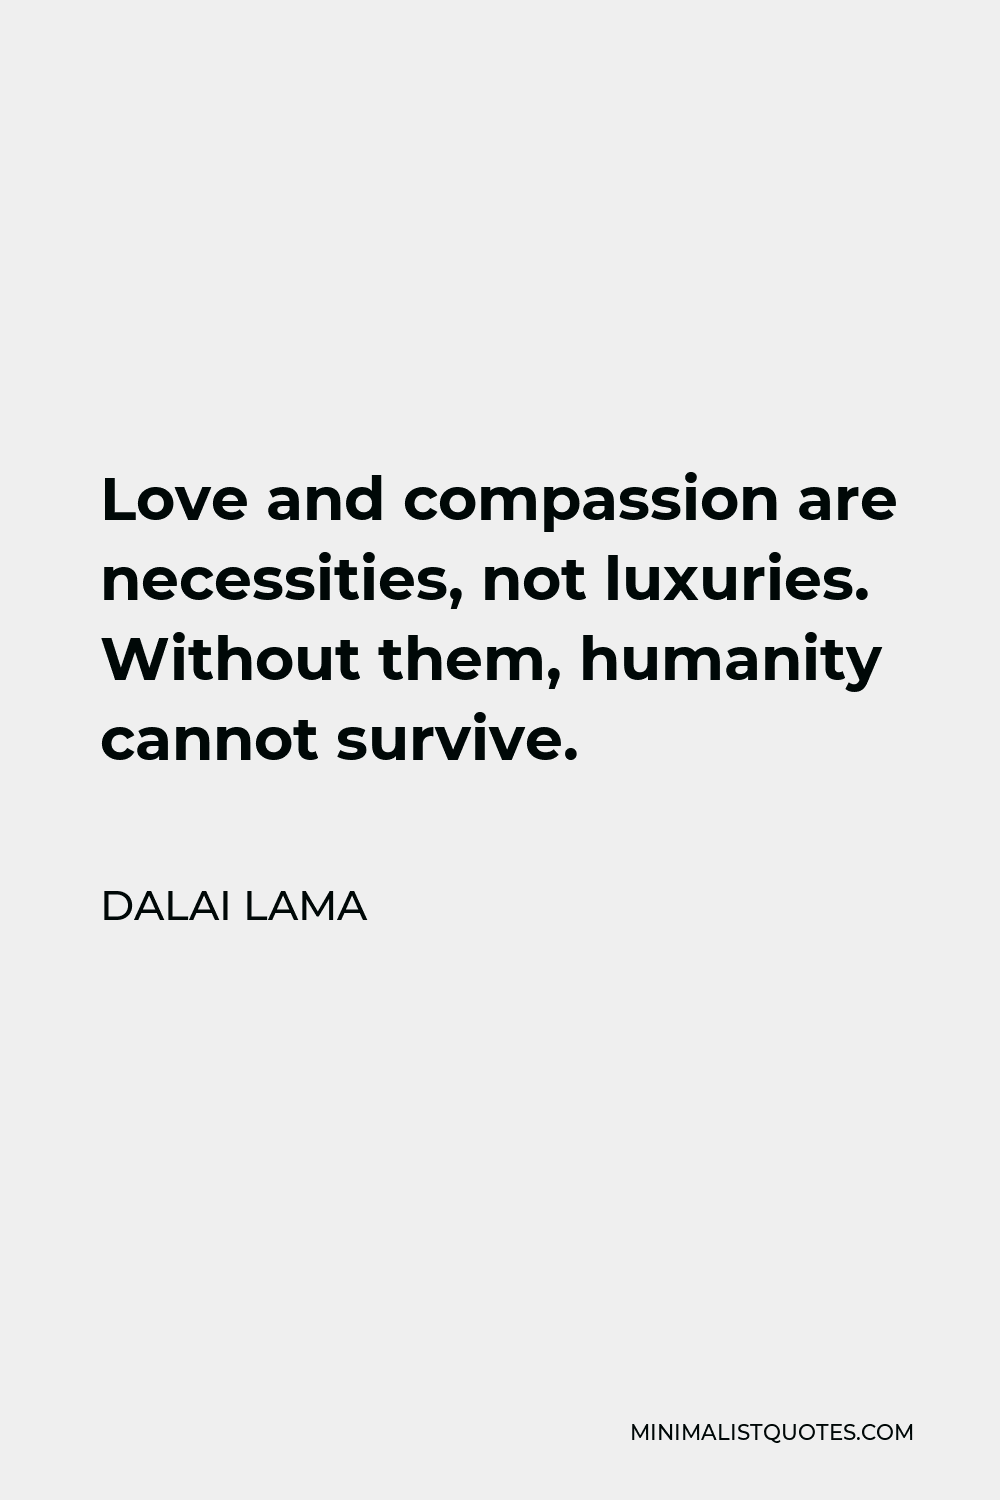 Dalai Lama Quote: Love and compassion are necessities, not luxuries ...